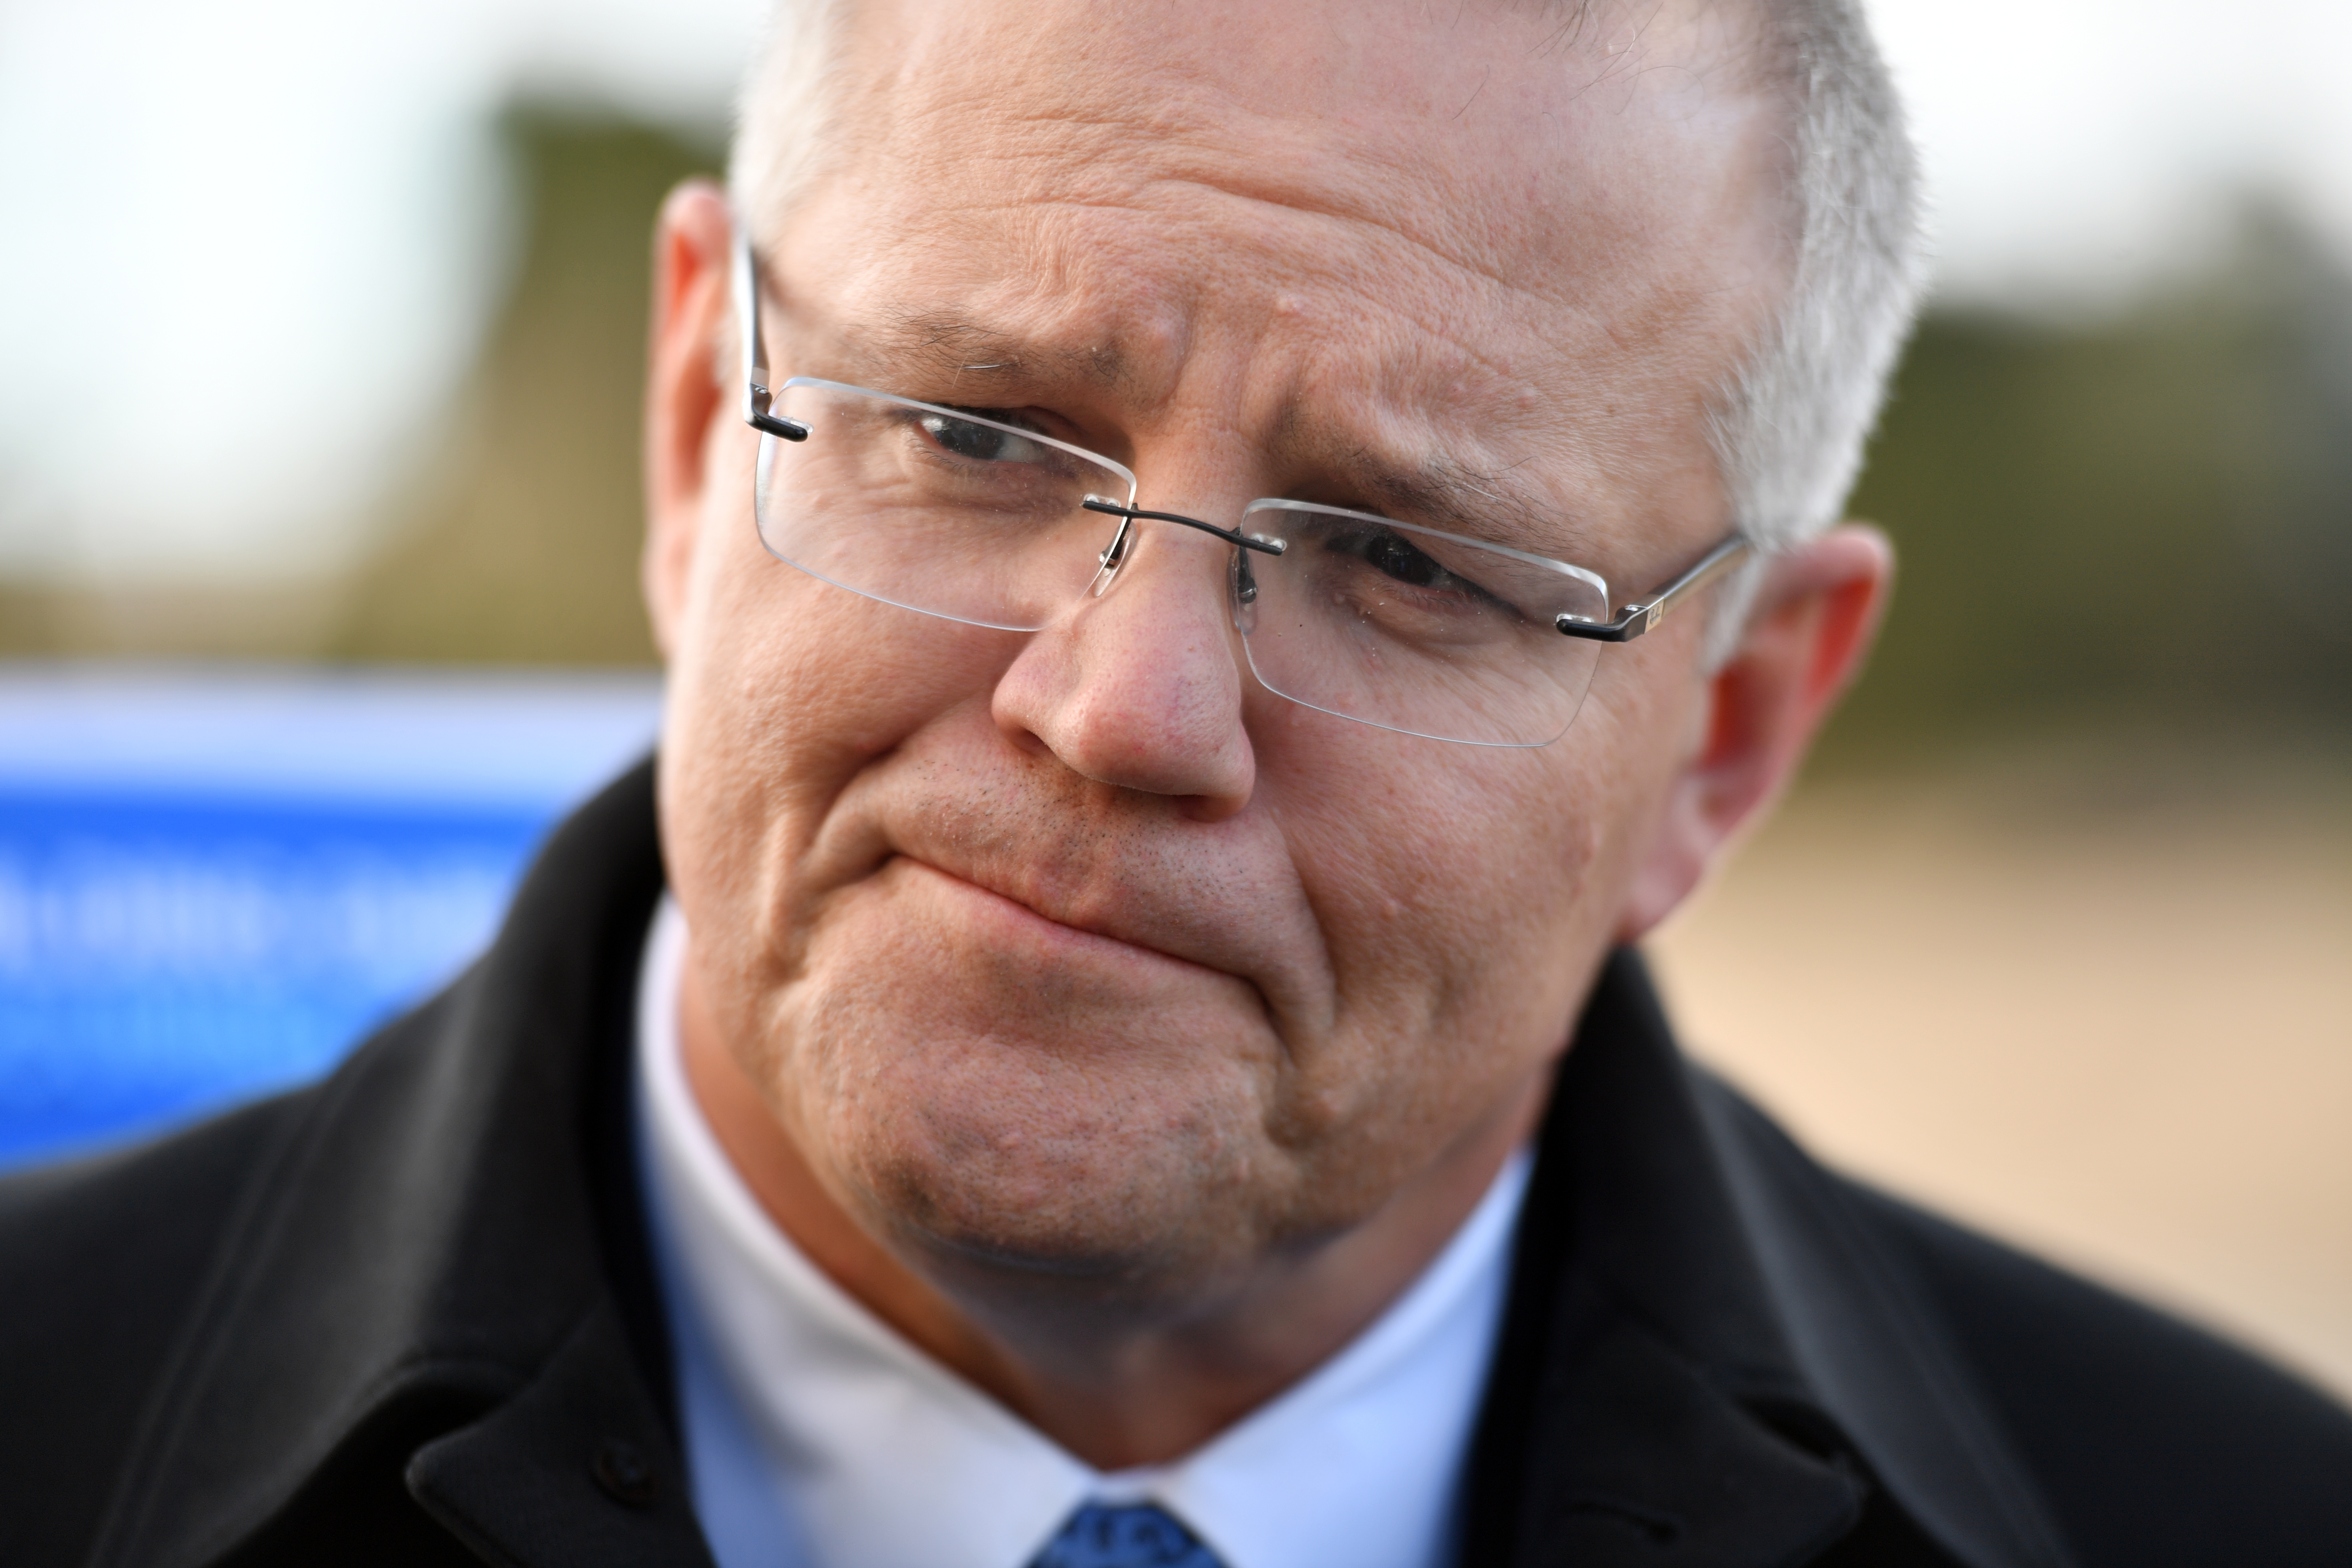 Scott Morrison says he’d find it ‘quite odd’ for state government to refuse fully-funded East-West Link